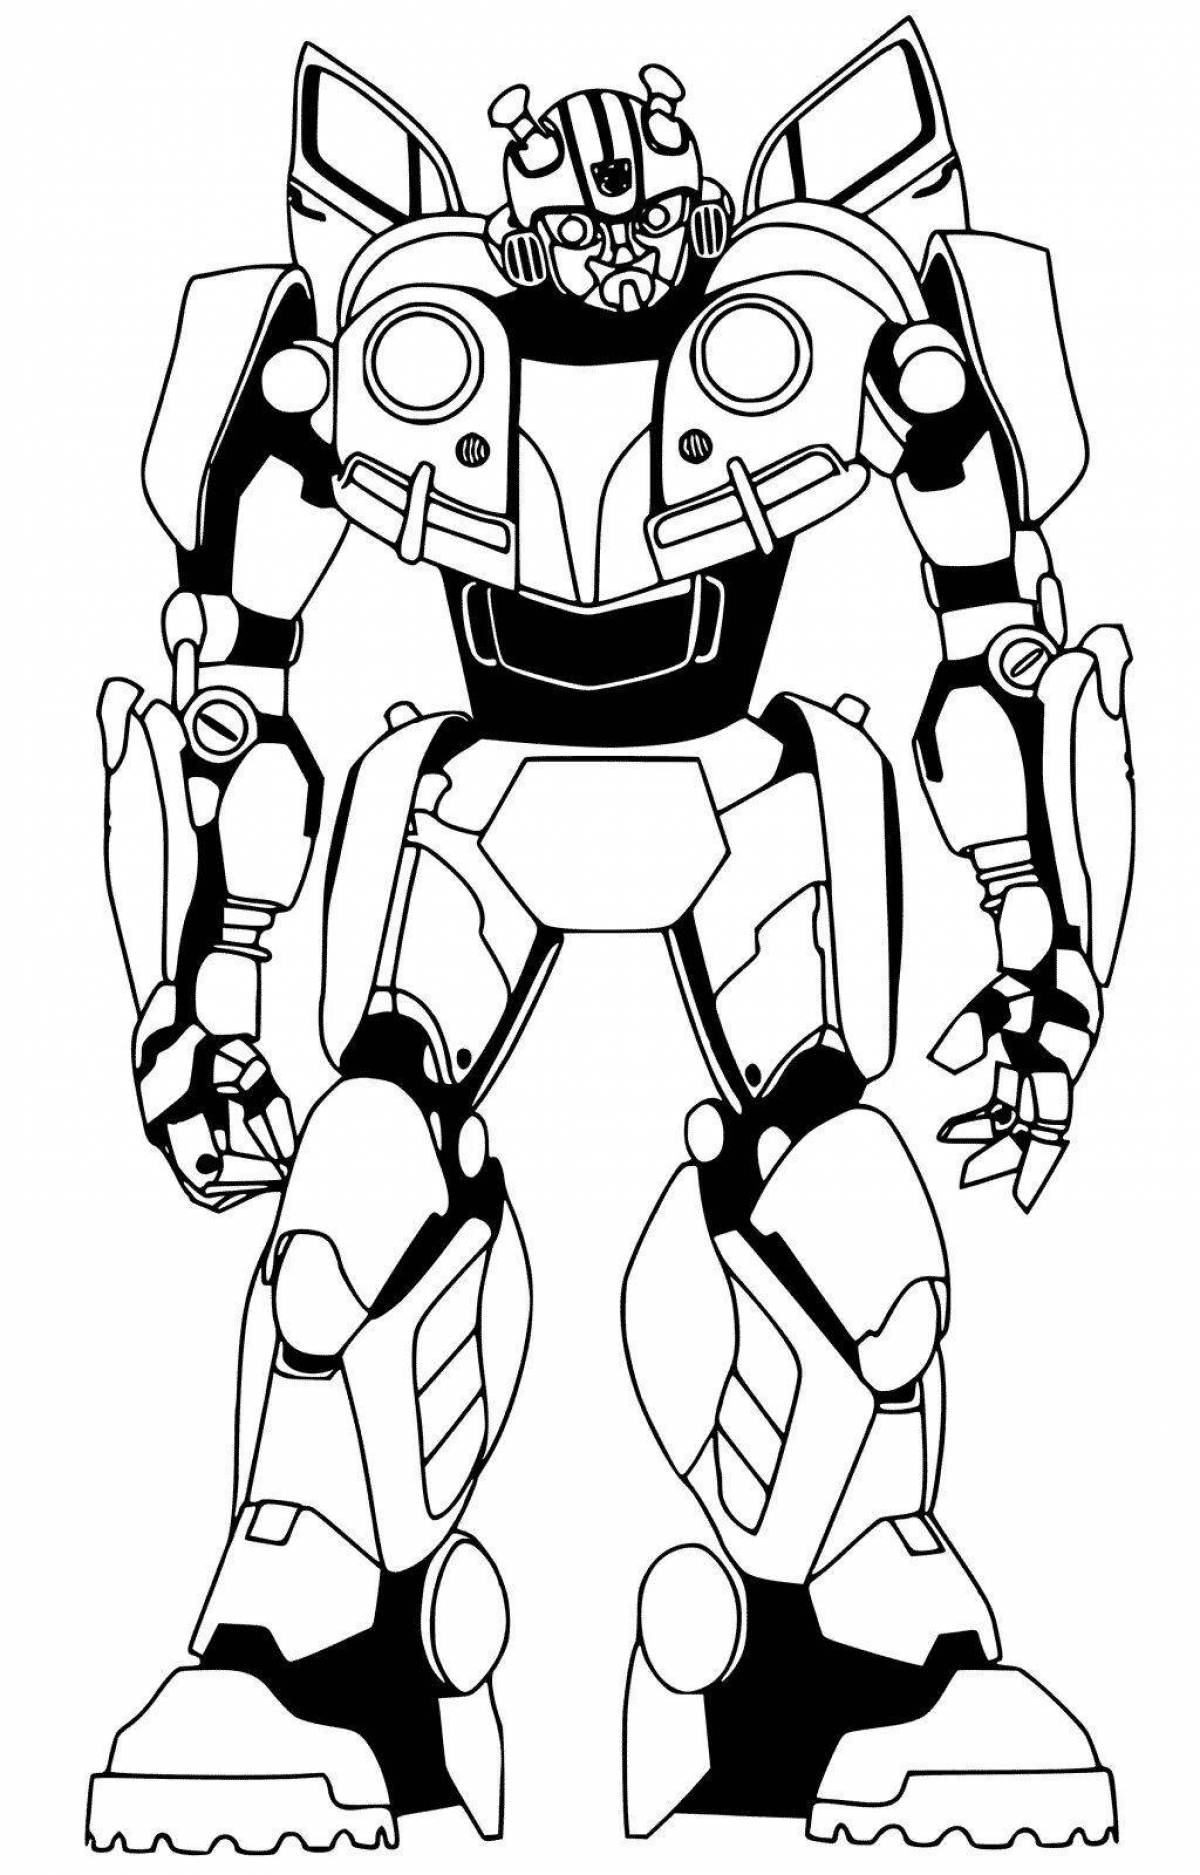 Gorgeous bumblebee mask coloring page